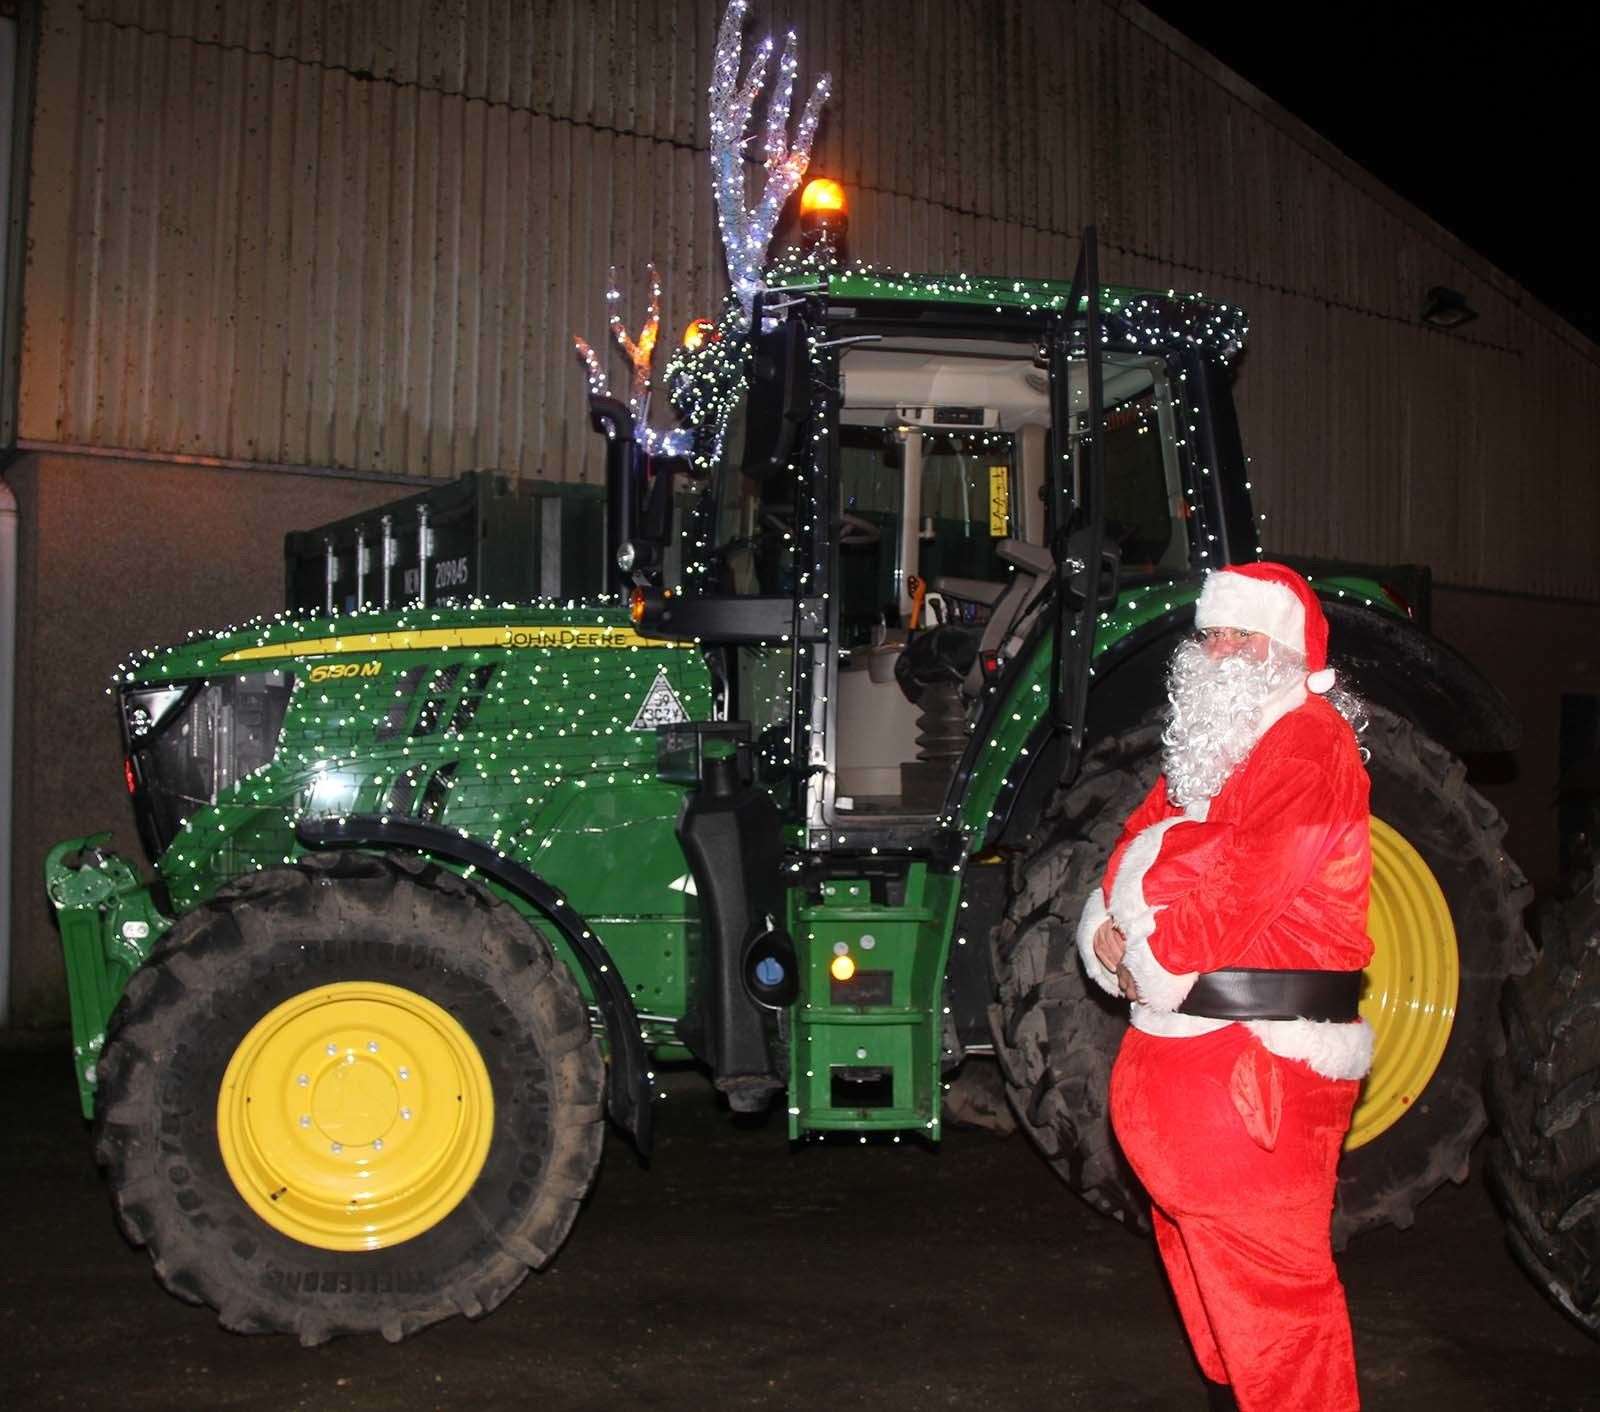 The Rudolph John Deere judged as the best. Picture: Ian Rennie.